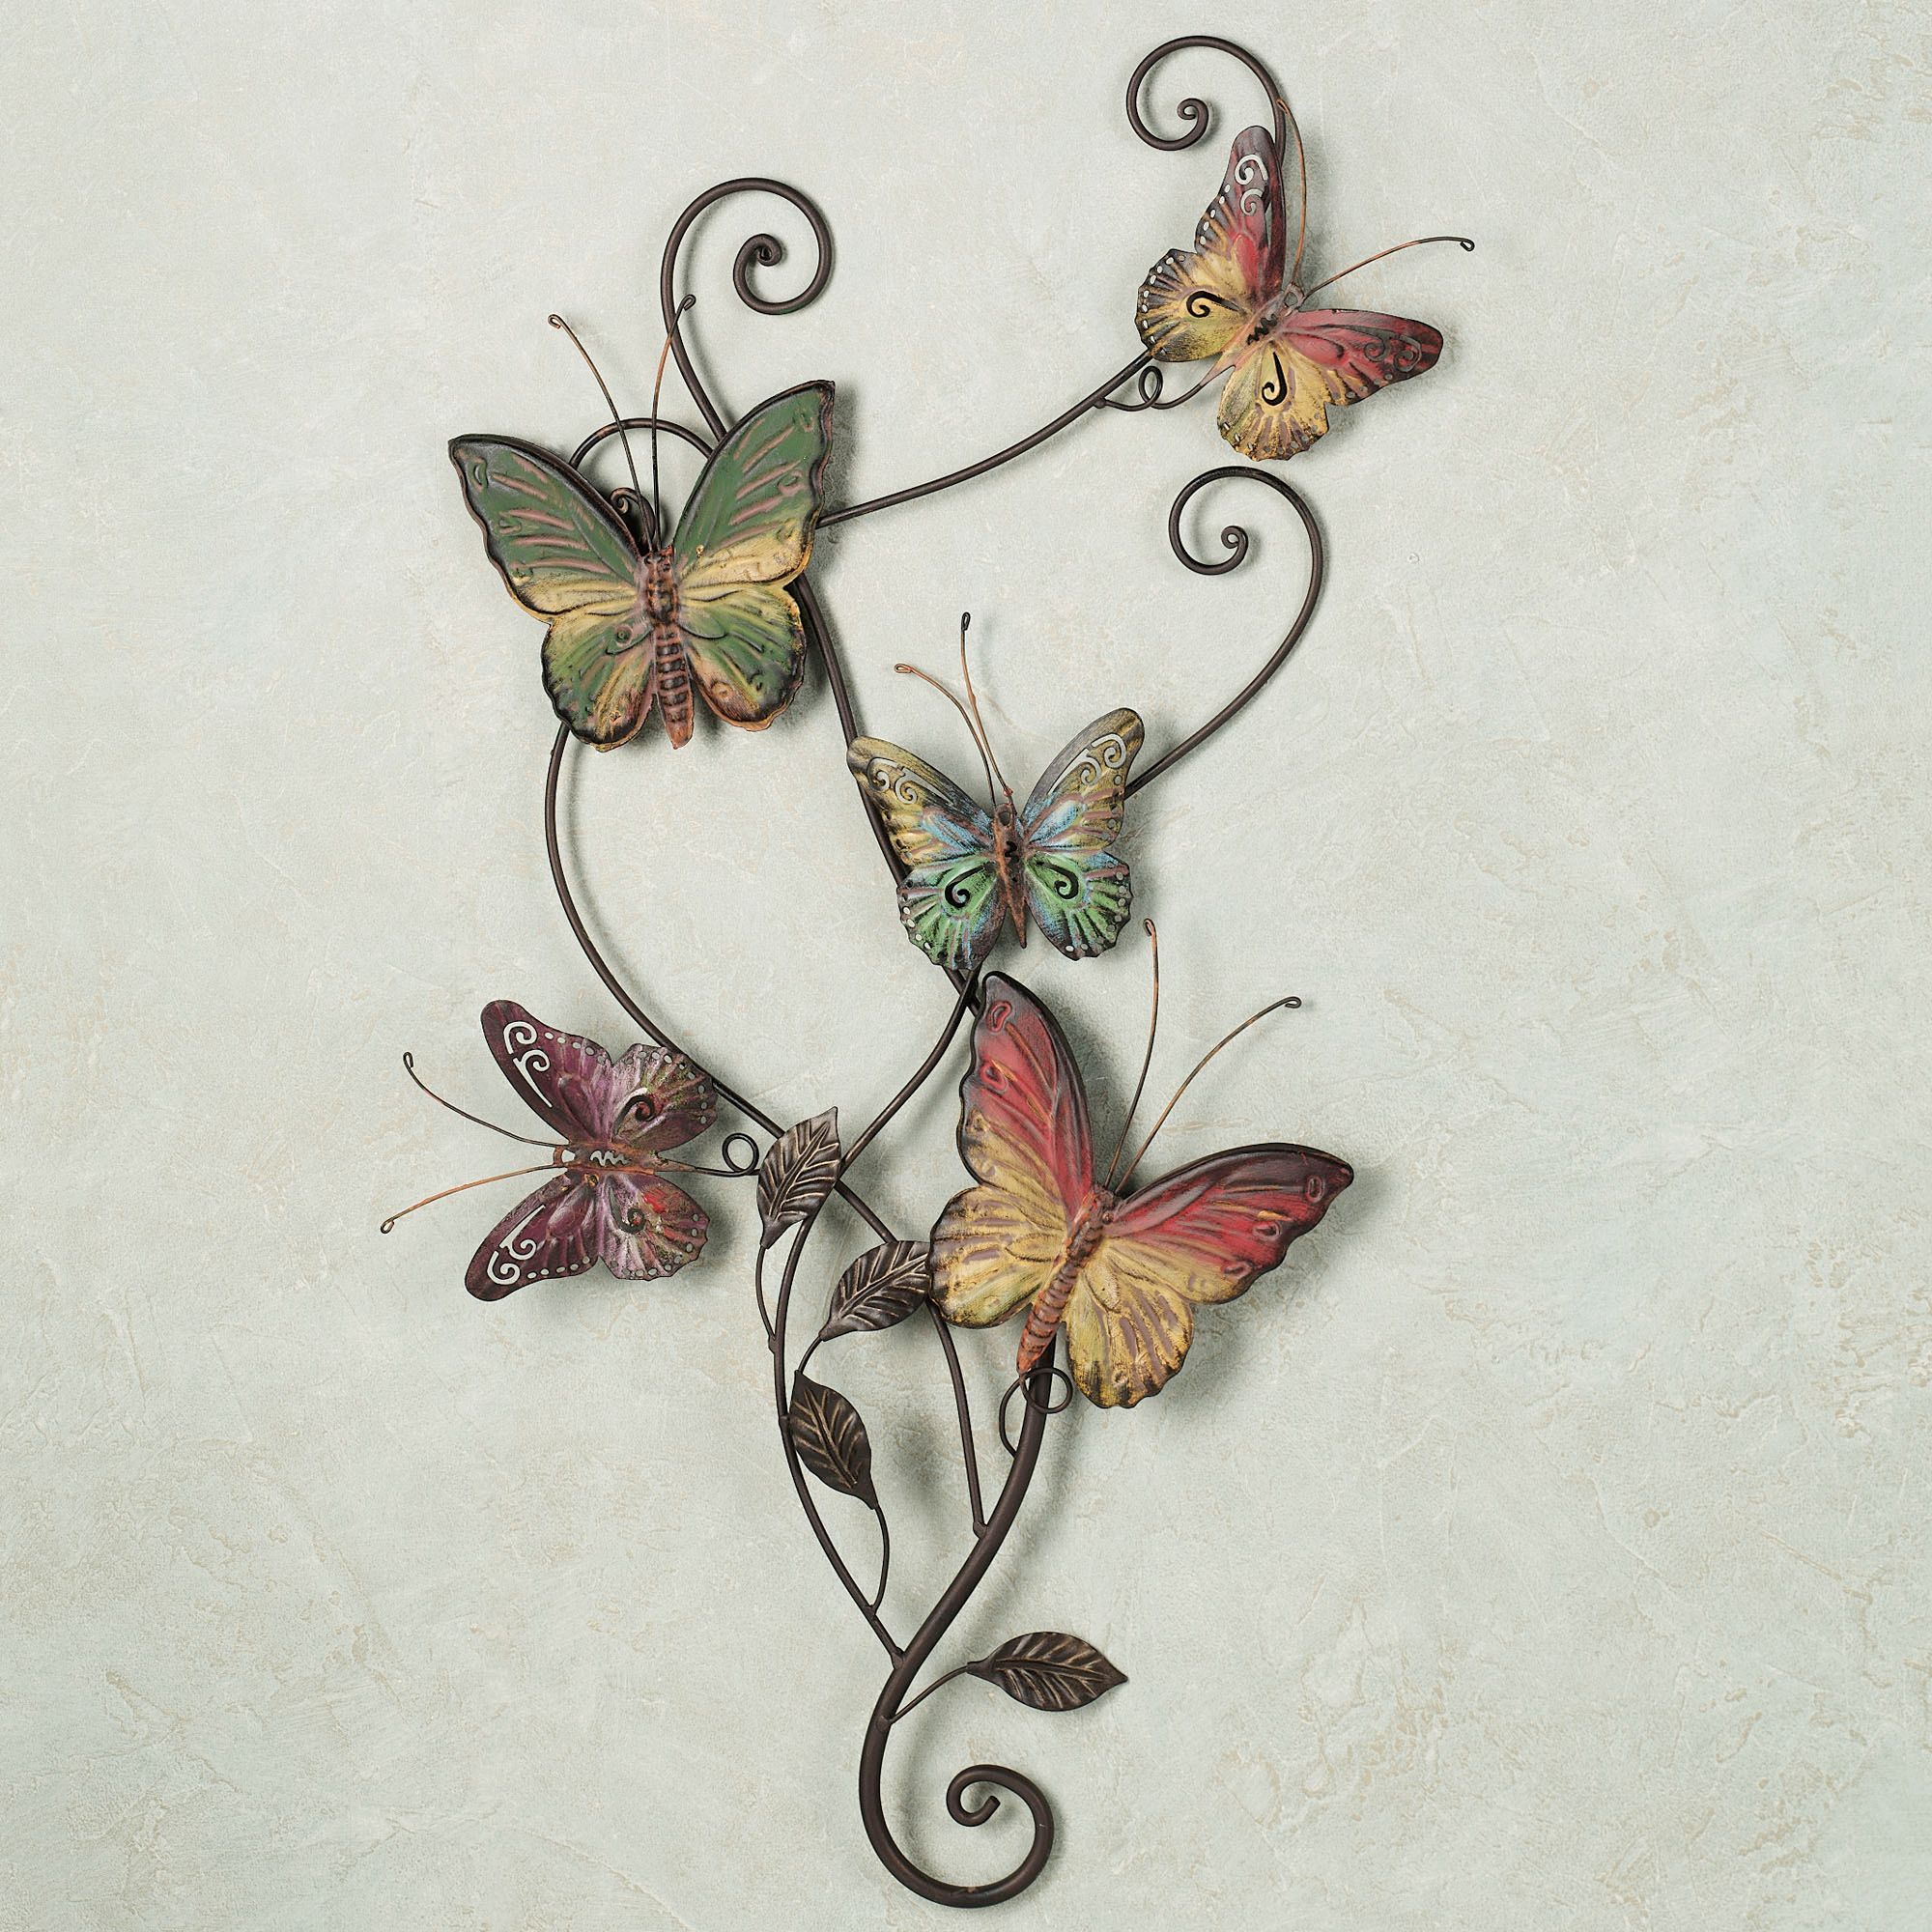 Butterfly Design Home Decor | No Assembly – Home Decoration 2019 With Regard To Flower And Butterfly Urban Design Metal Wall Decor (View 26 of 30)